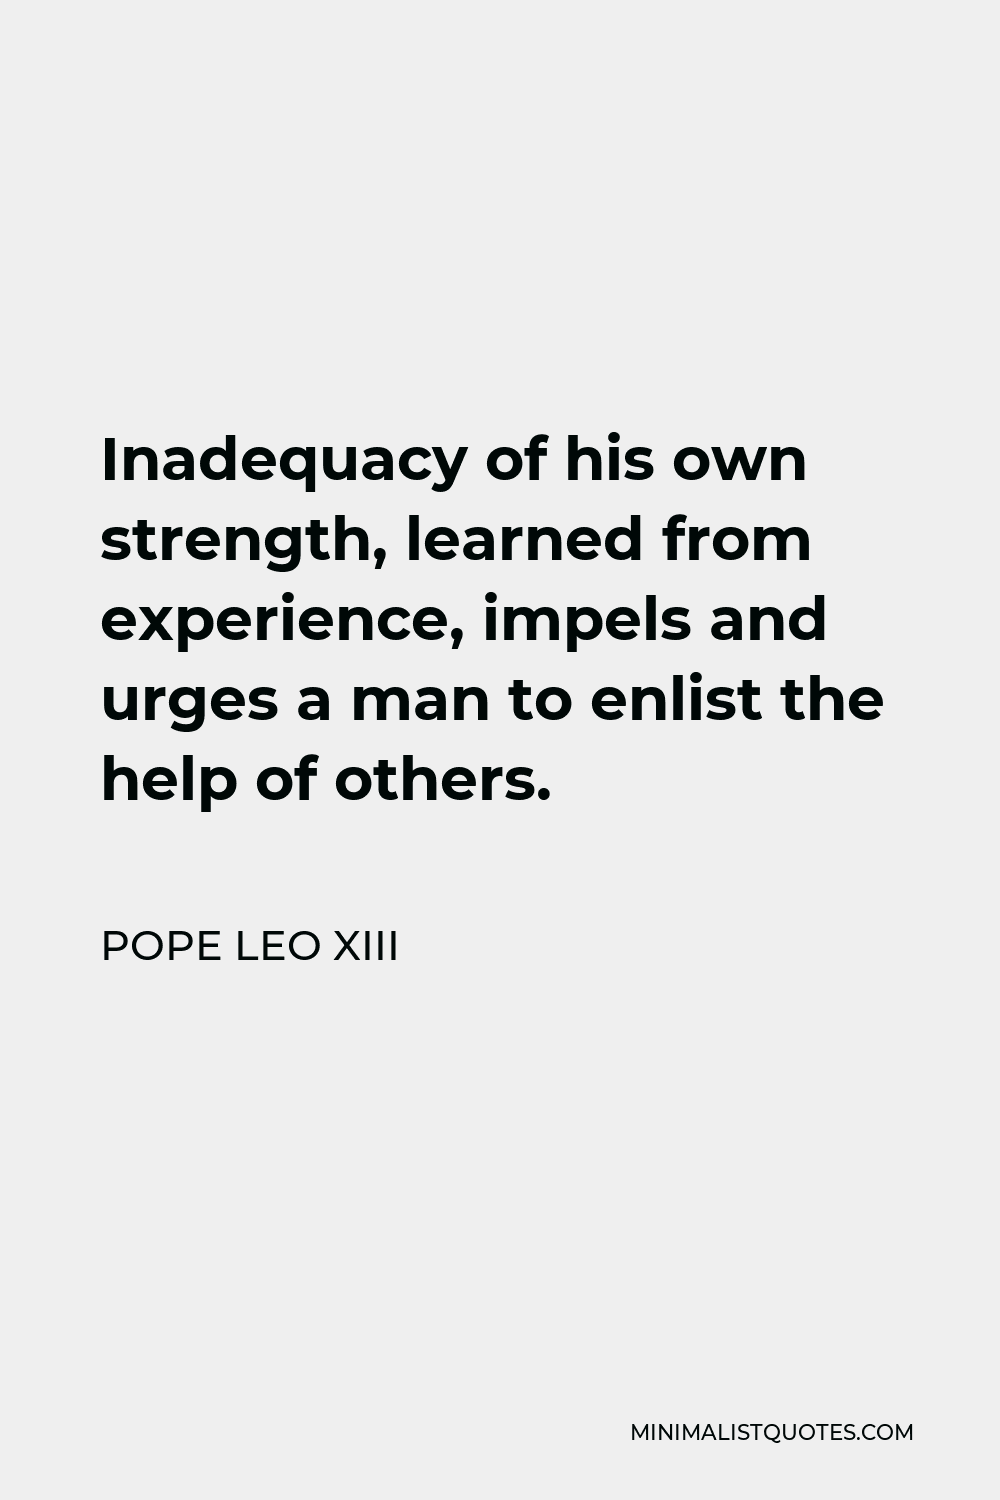 Pope Leo XIII Quote - Inadequacy of his own strength, learned from experience, impels and urges a man to enlist the help of others.